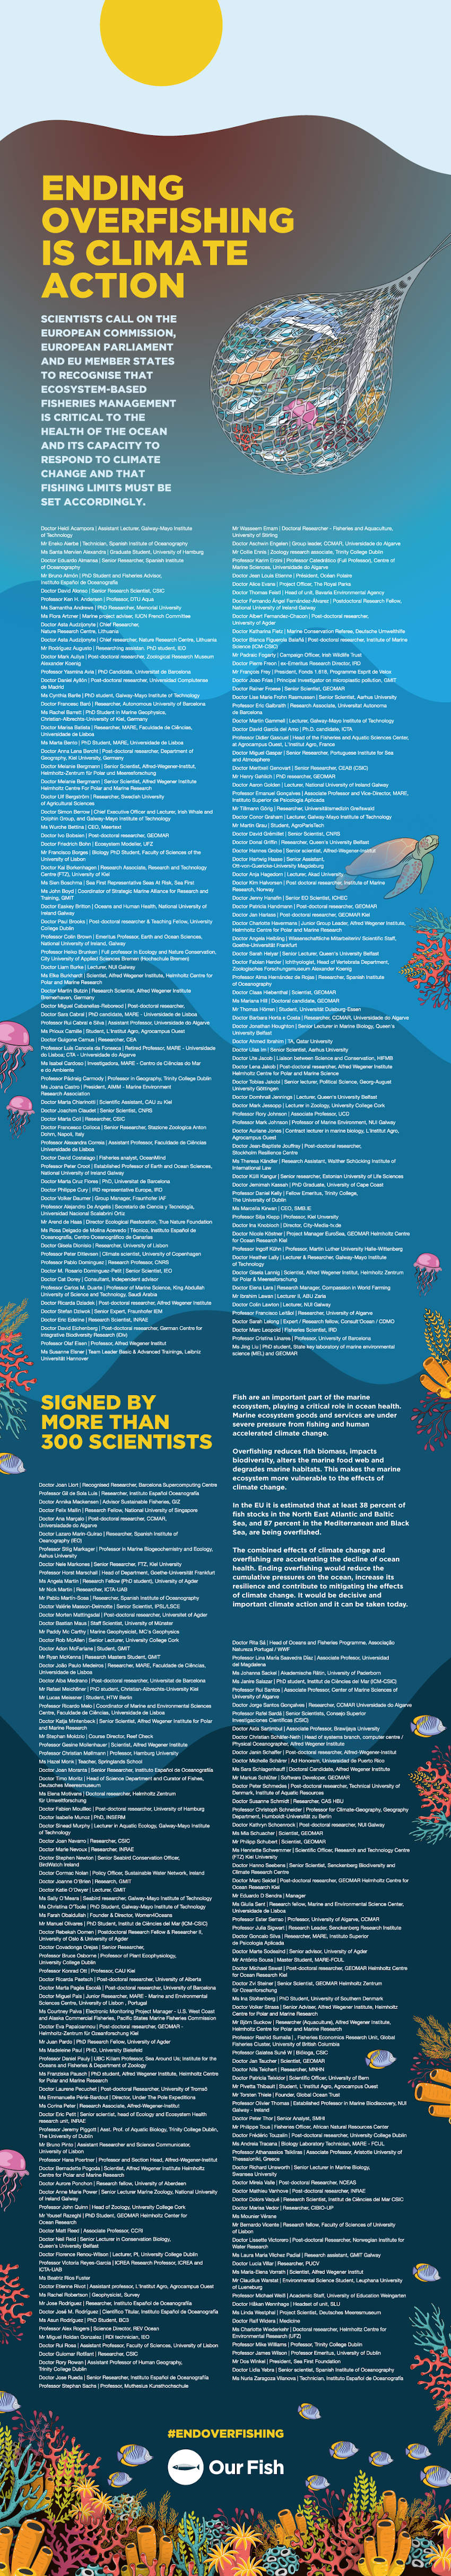 Our Fish statement and signatories